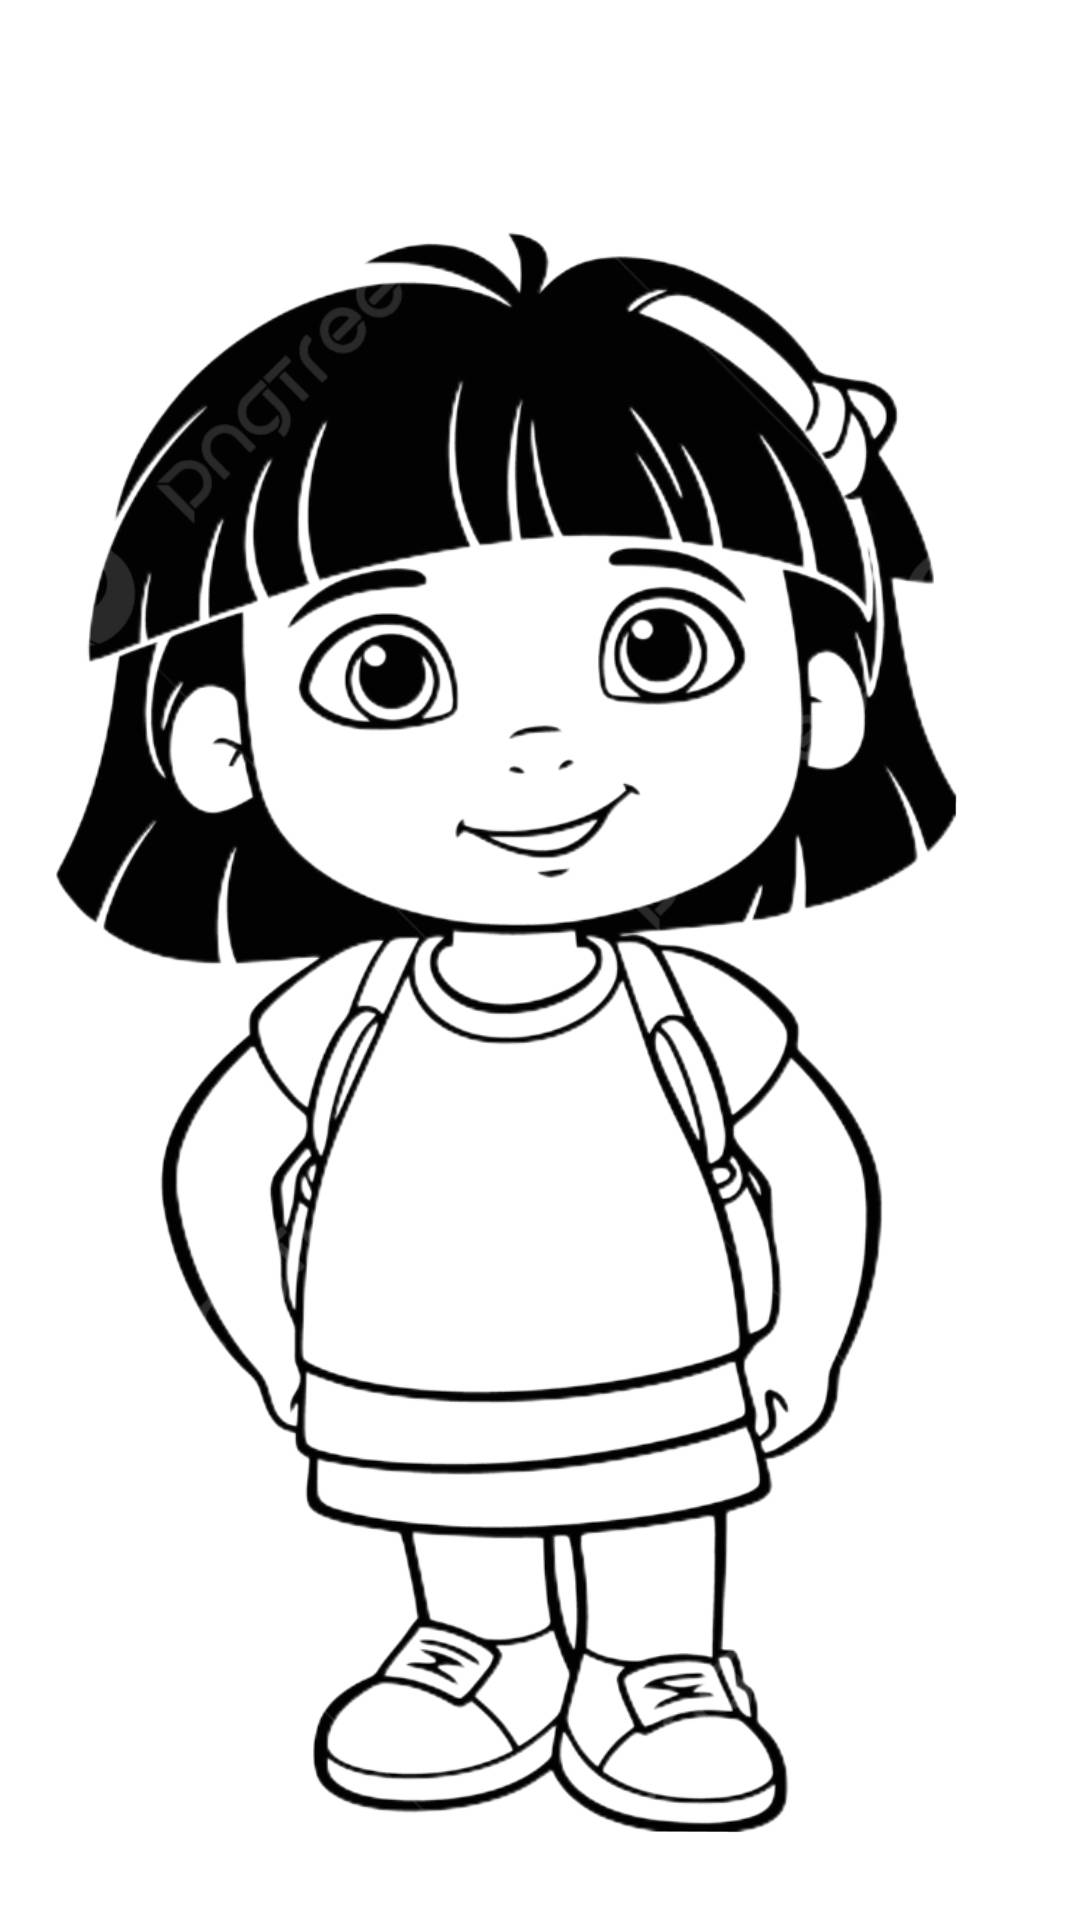 An image showing dora coloring pages outline sketc by joaauvinen on